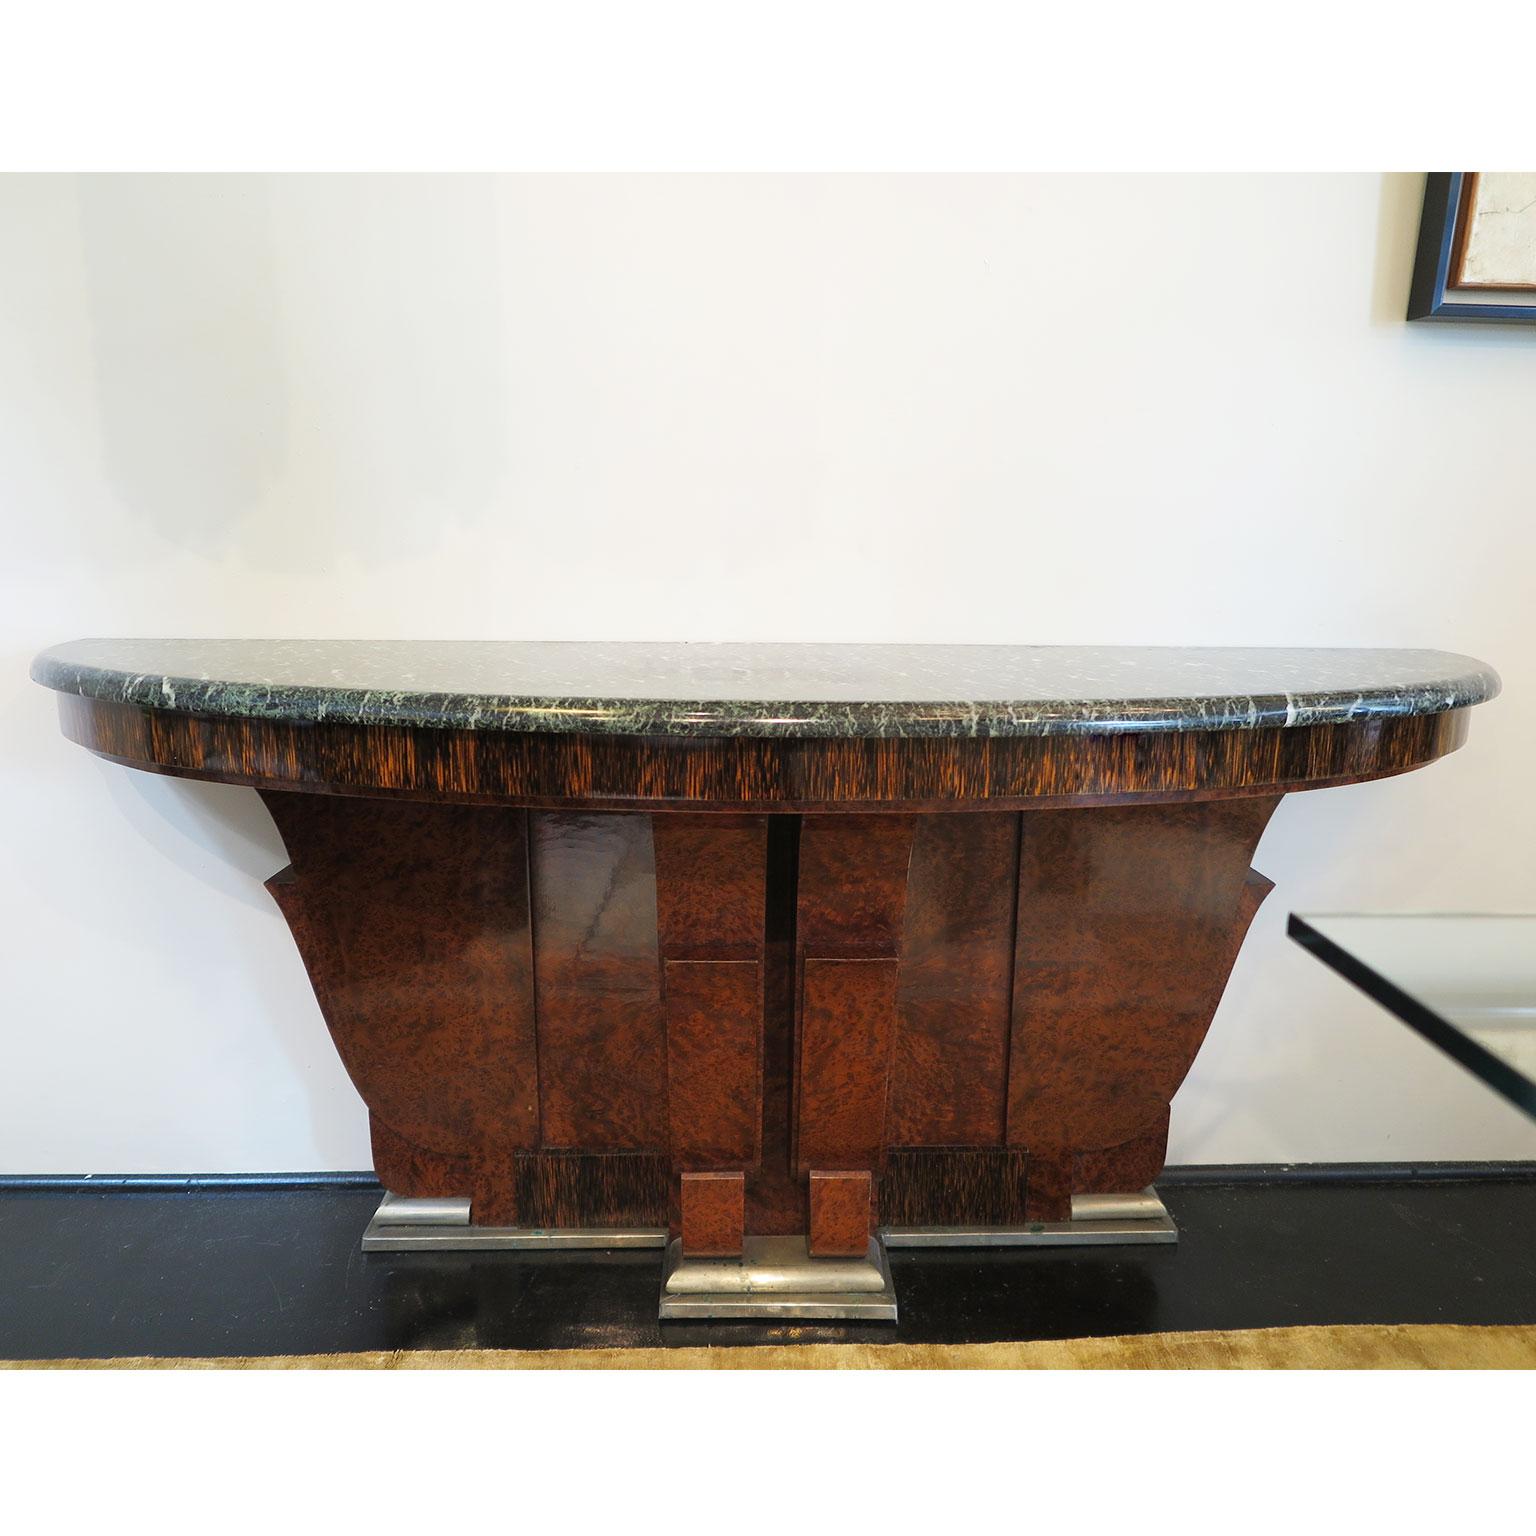 These beautiful consoles are fully in original condition. Crafted in a Mapa burl wood veneer the base showcases curved carving designs with a base foot in aged nickel. The apron displays a unique palmwood veneer with the top possessing the original